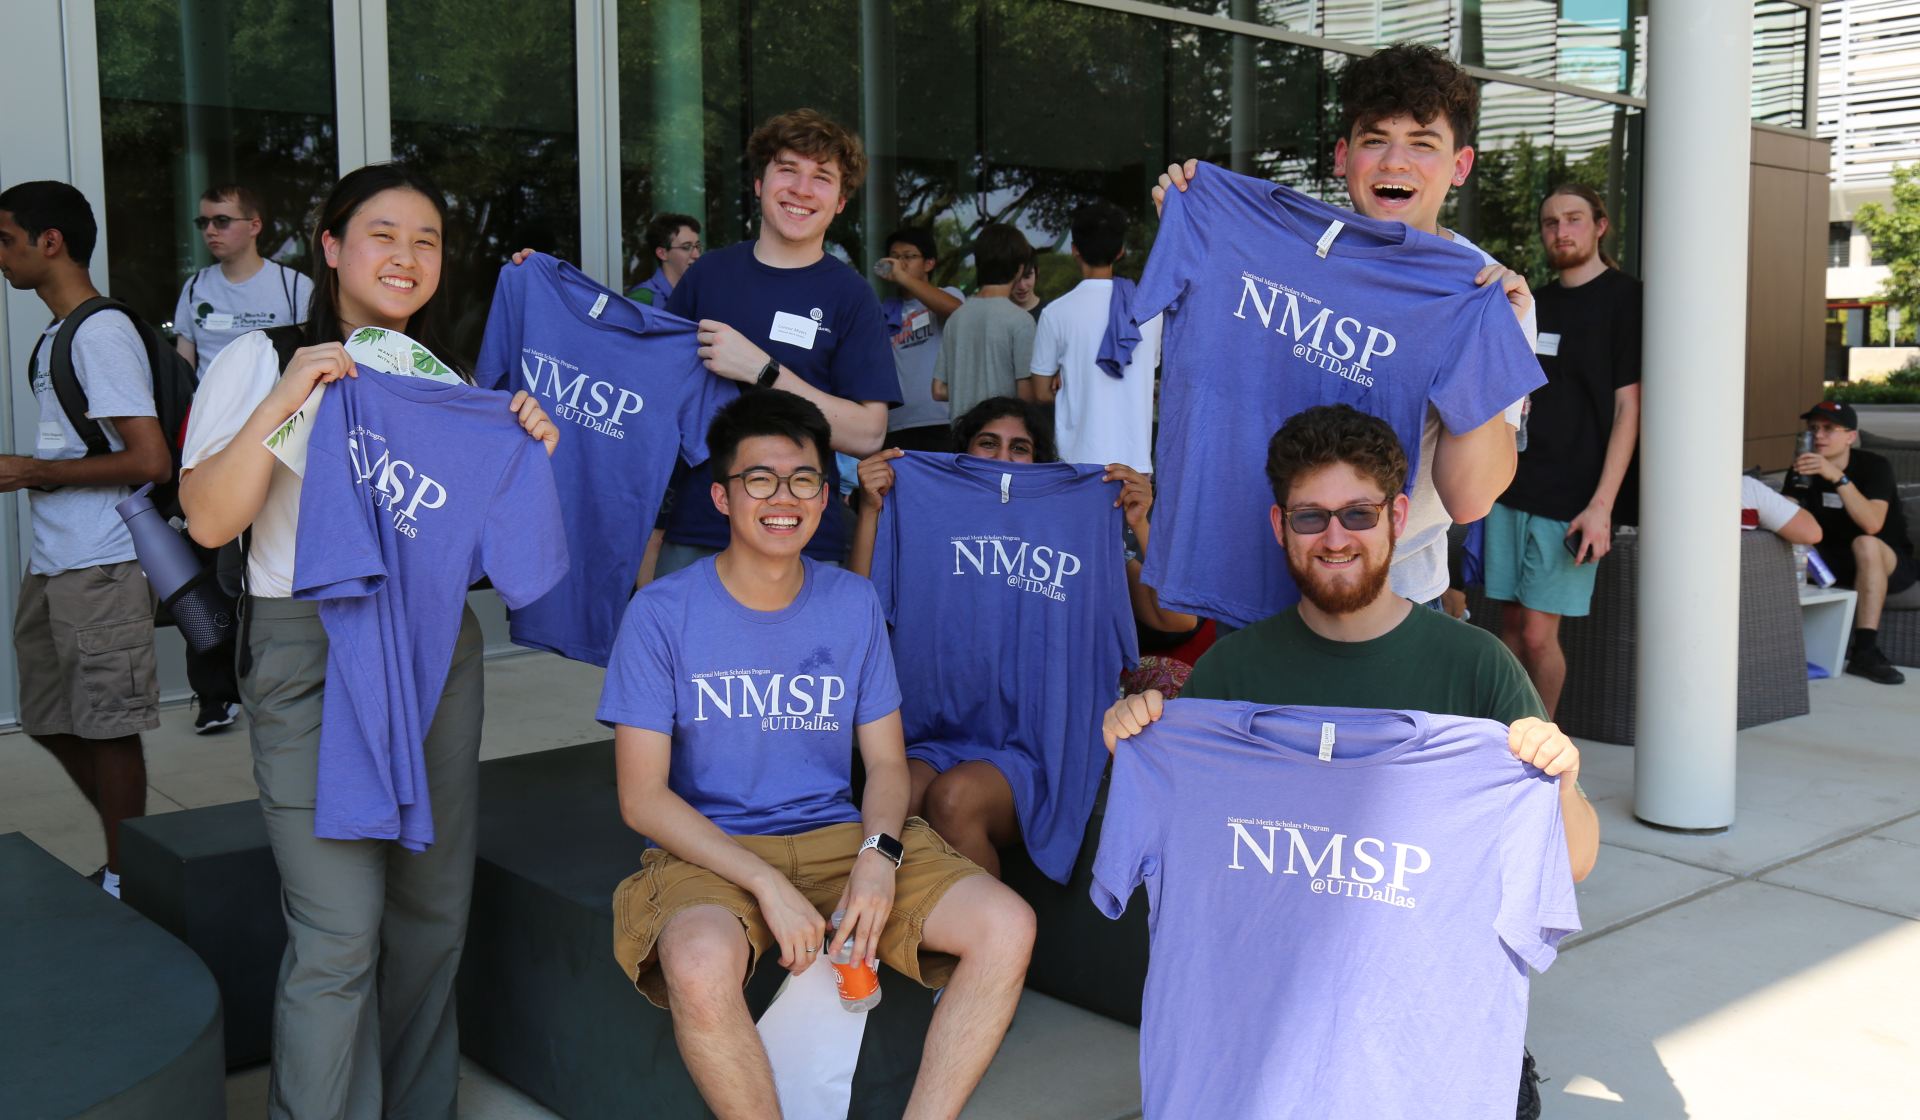 National Merit Scholars hold up T-shirts